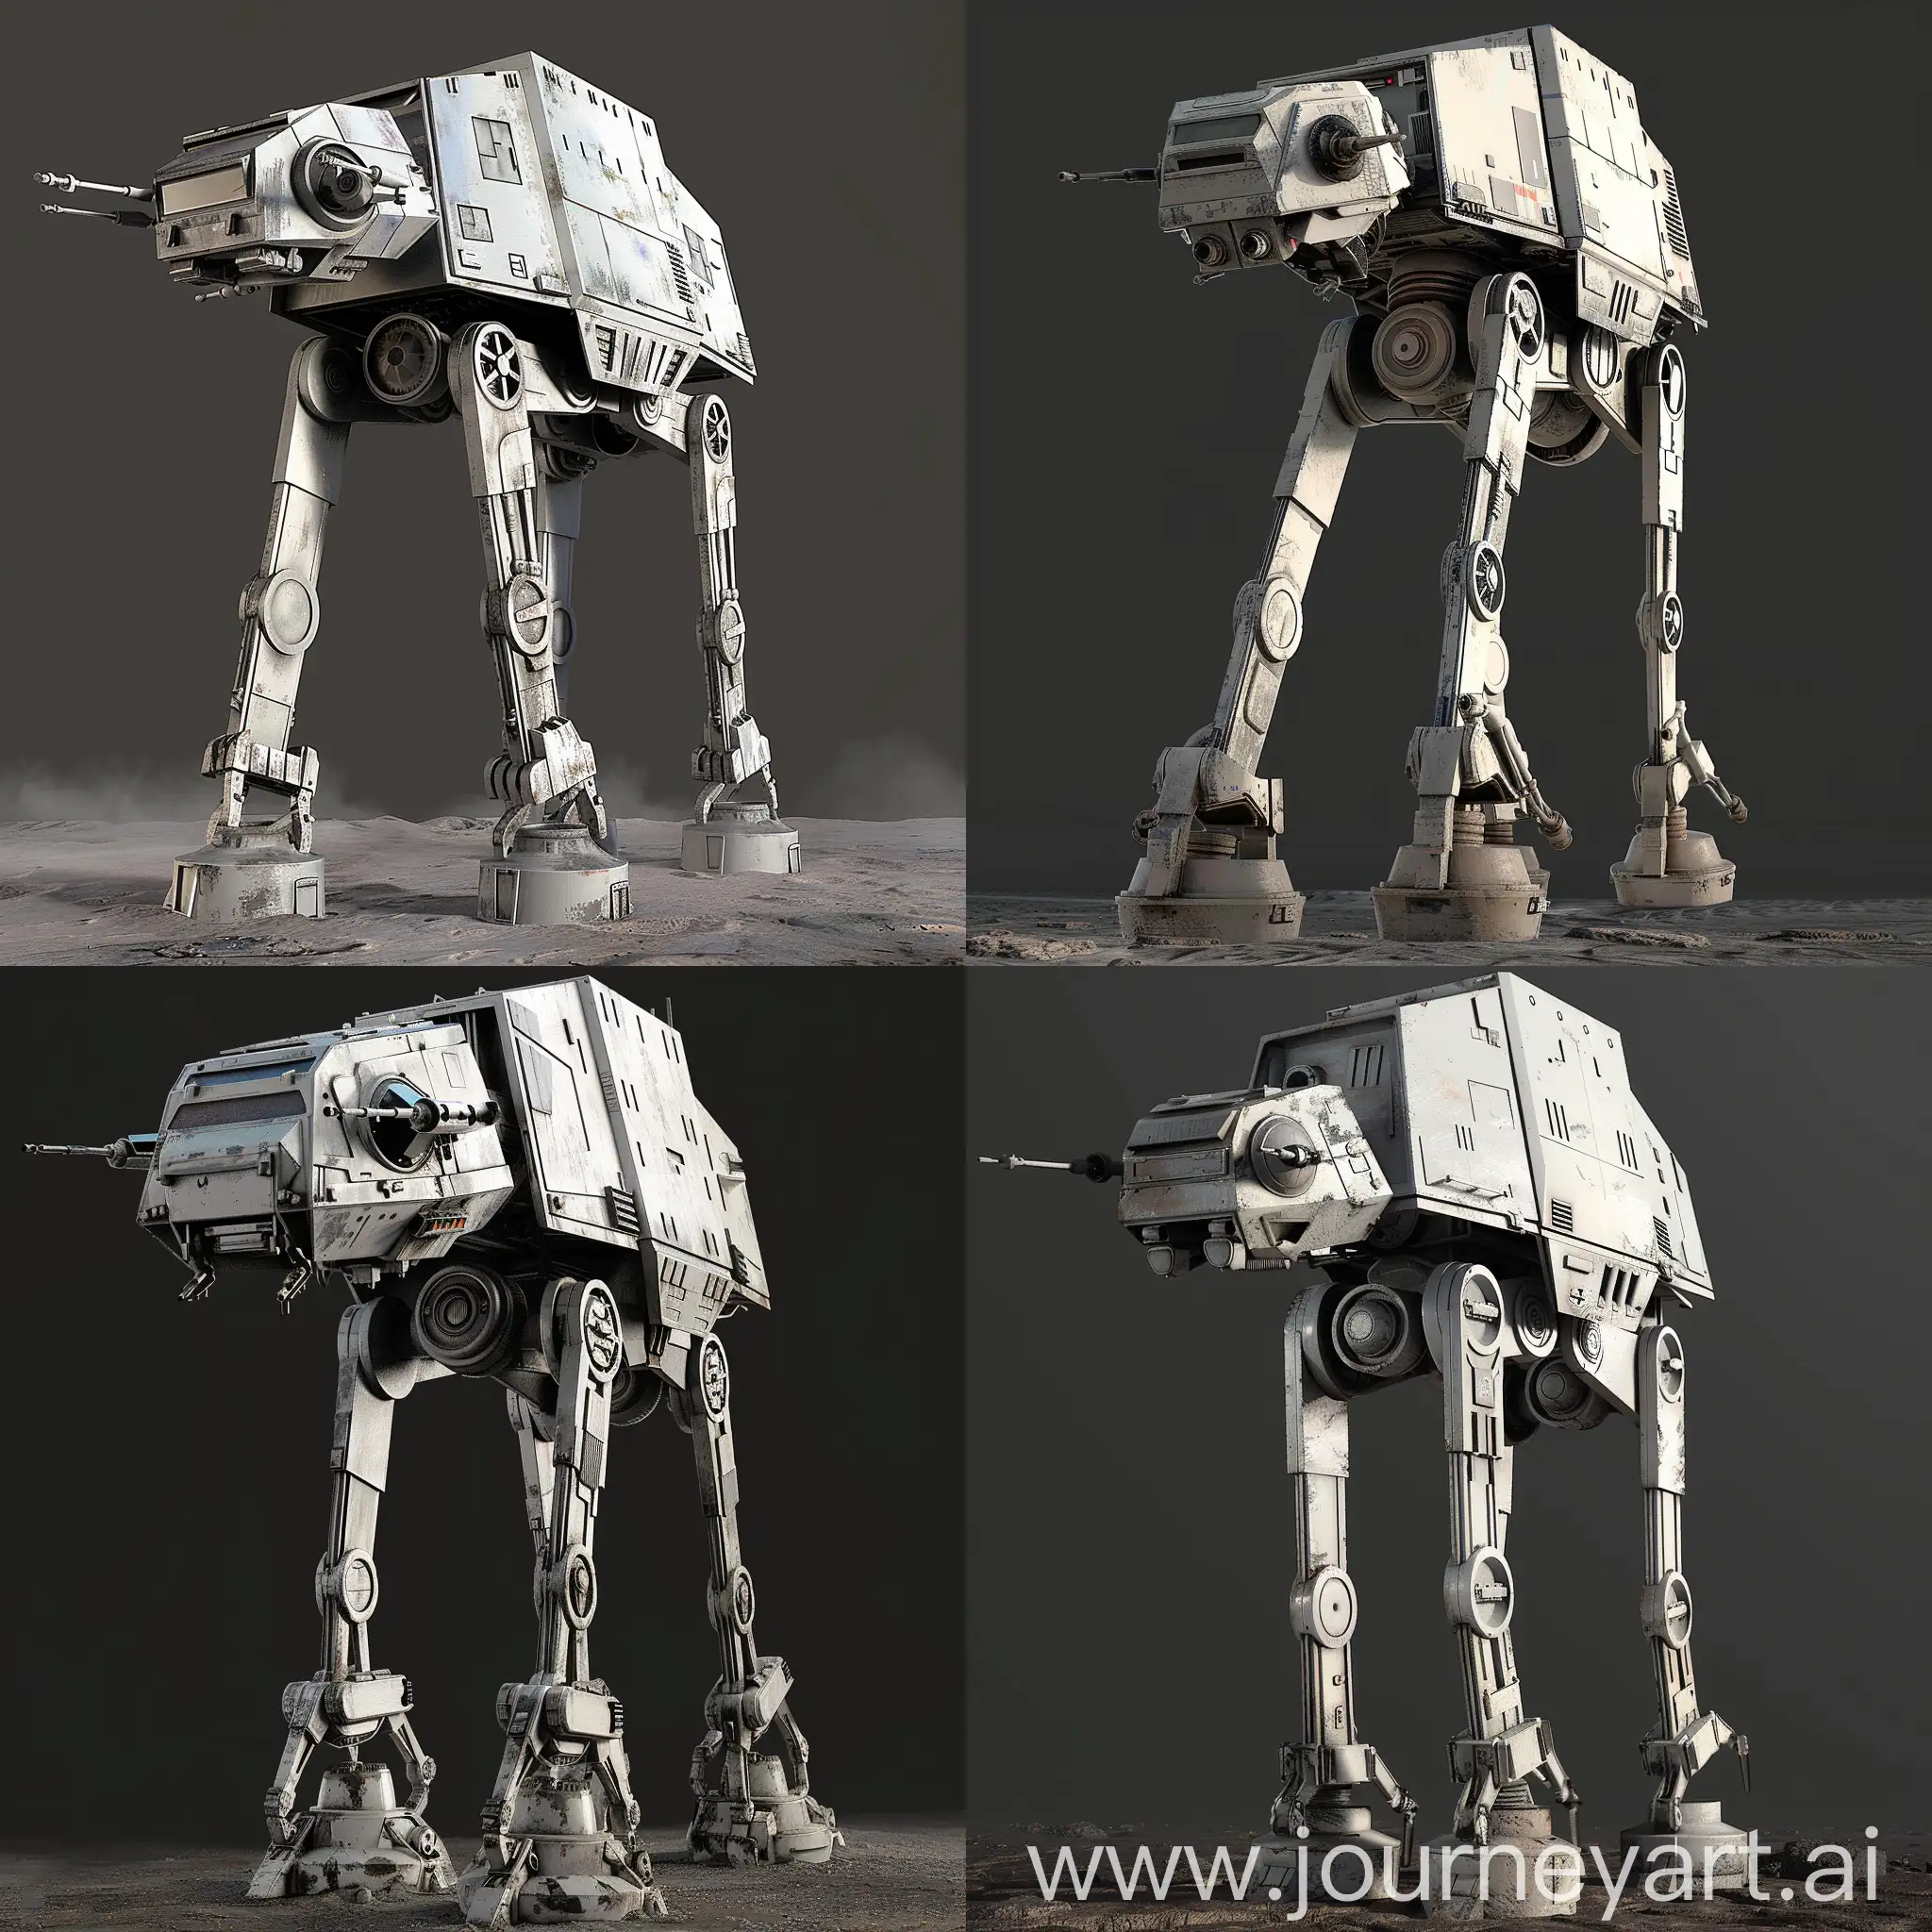 Futuristic Star Wars All Terrain Scout Transport https://static.wikia.nocookie.net/starwars/images/f/ff/ATST-SWBdice.png/revision/latest?cb=20230723050455, AT-ST Mk II (or variant name), Futuristic, Bipedal Walker, Sleek, Advanced Weaponry, Armored Reconnaissance Vehicle, Sci-Fi Military, Detailed Cockpit, Dynamic Pose, Planetary Landscape, Galactic Empire (if it remains affiliated), Rugged Terrain (for the environment), Battle-worn (for a war-torn look), octane render--stylize 1000